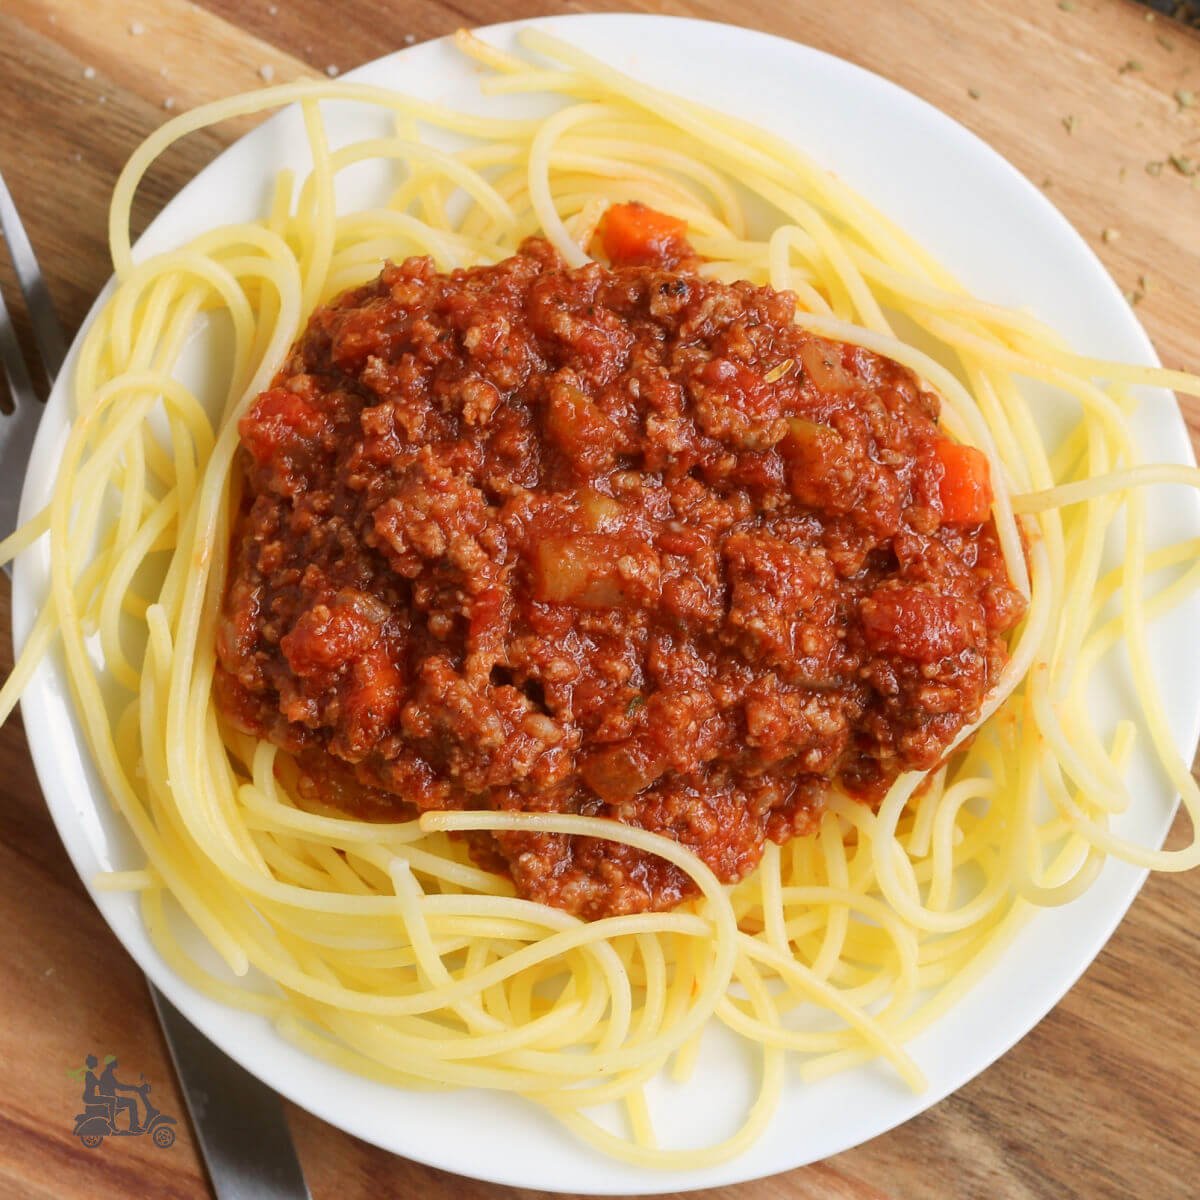 Plate of spaghetti with Italian meat sauce on top.